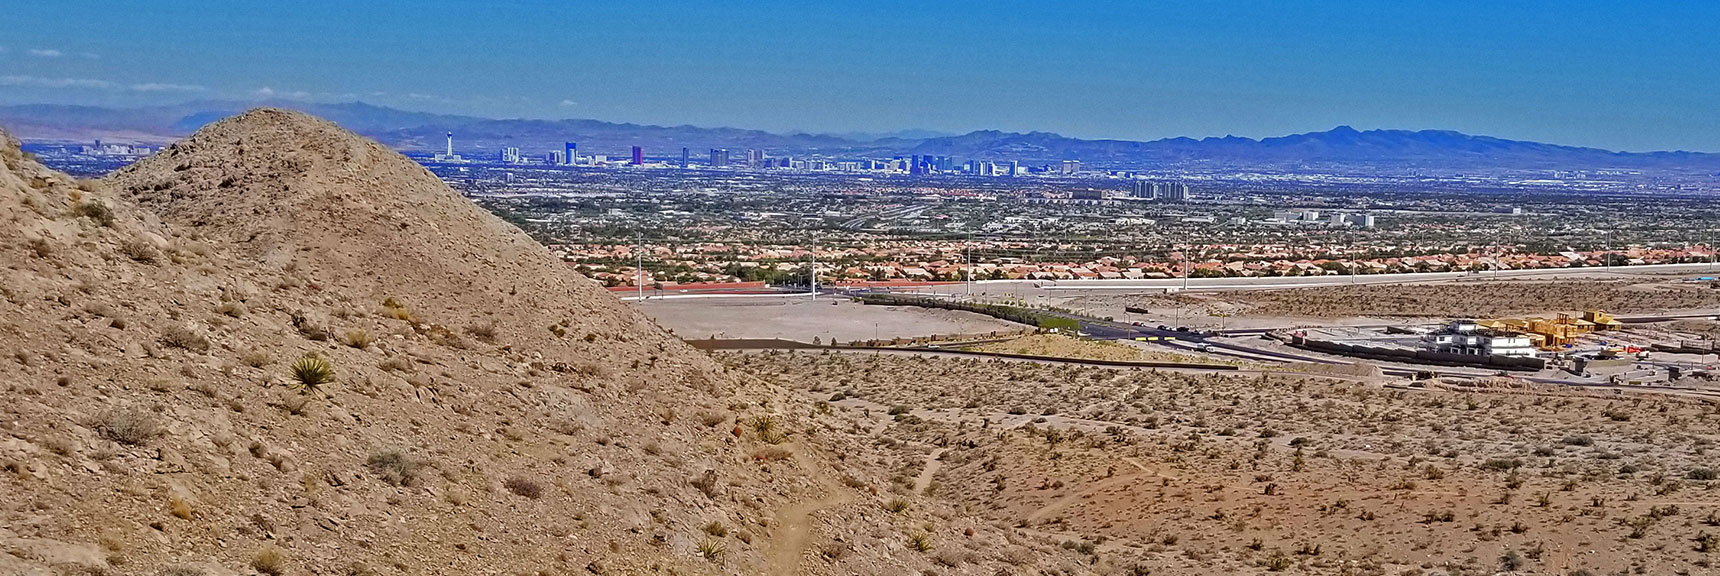 Upper End of Lake Mead Blvd Visible. Lake Mead Blvd Continues to Advance. Spring of 2022. | Little La Madre Mt, Little El Padre Mt, Little Burnt Peak | Near La Madre Mountains Wilderness, Nevada